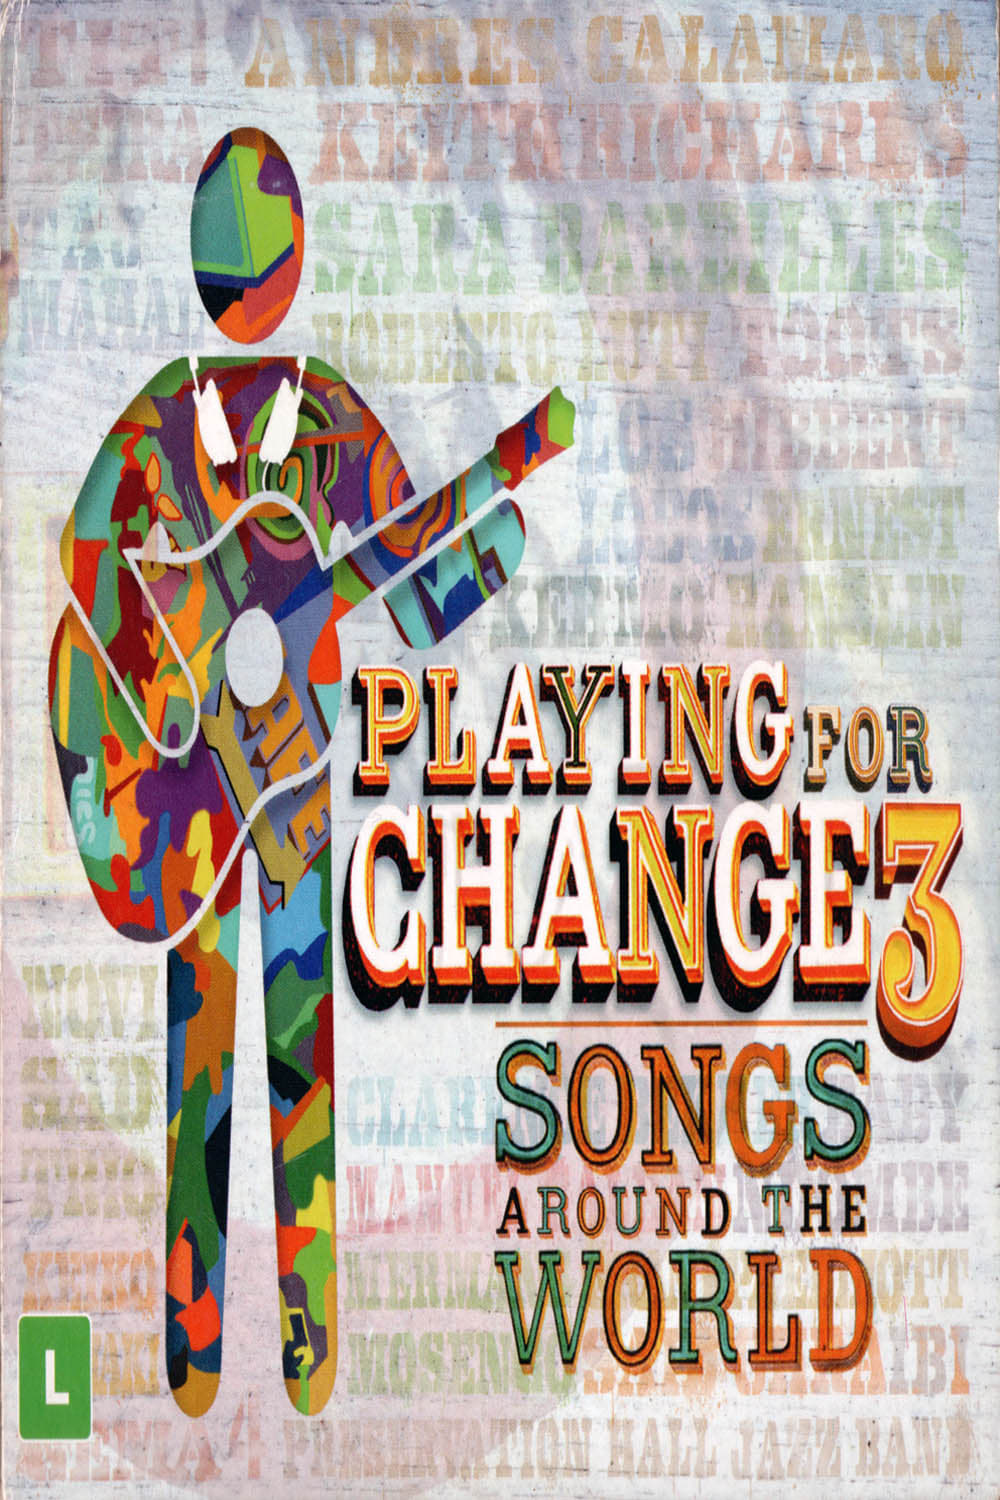 Playing For Change 3 - Songs Around The World